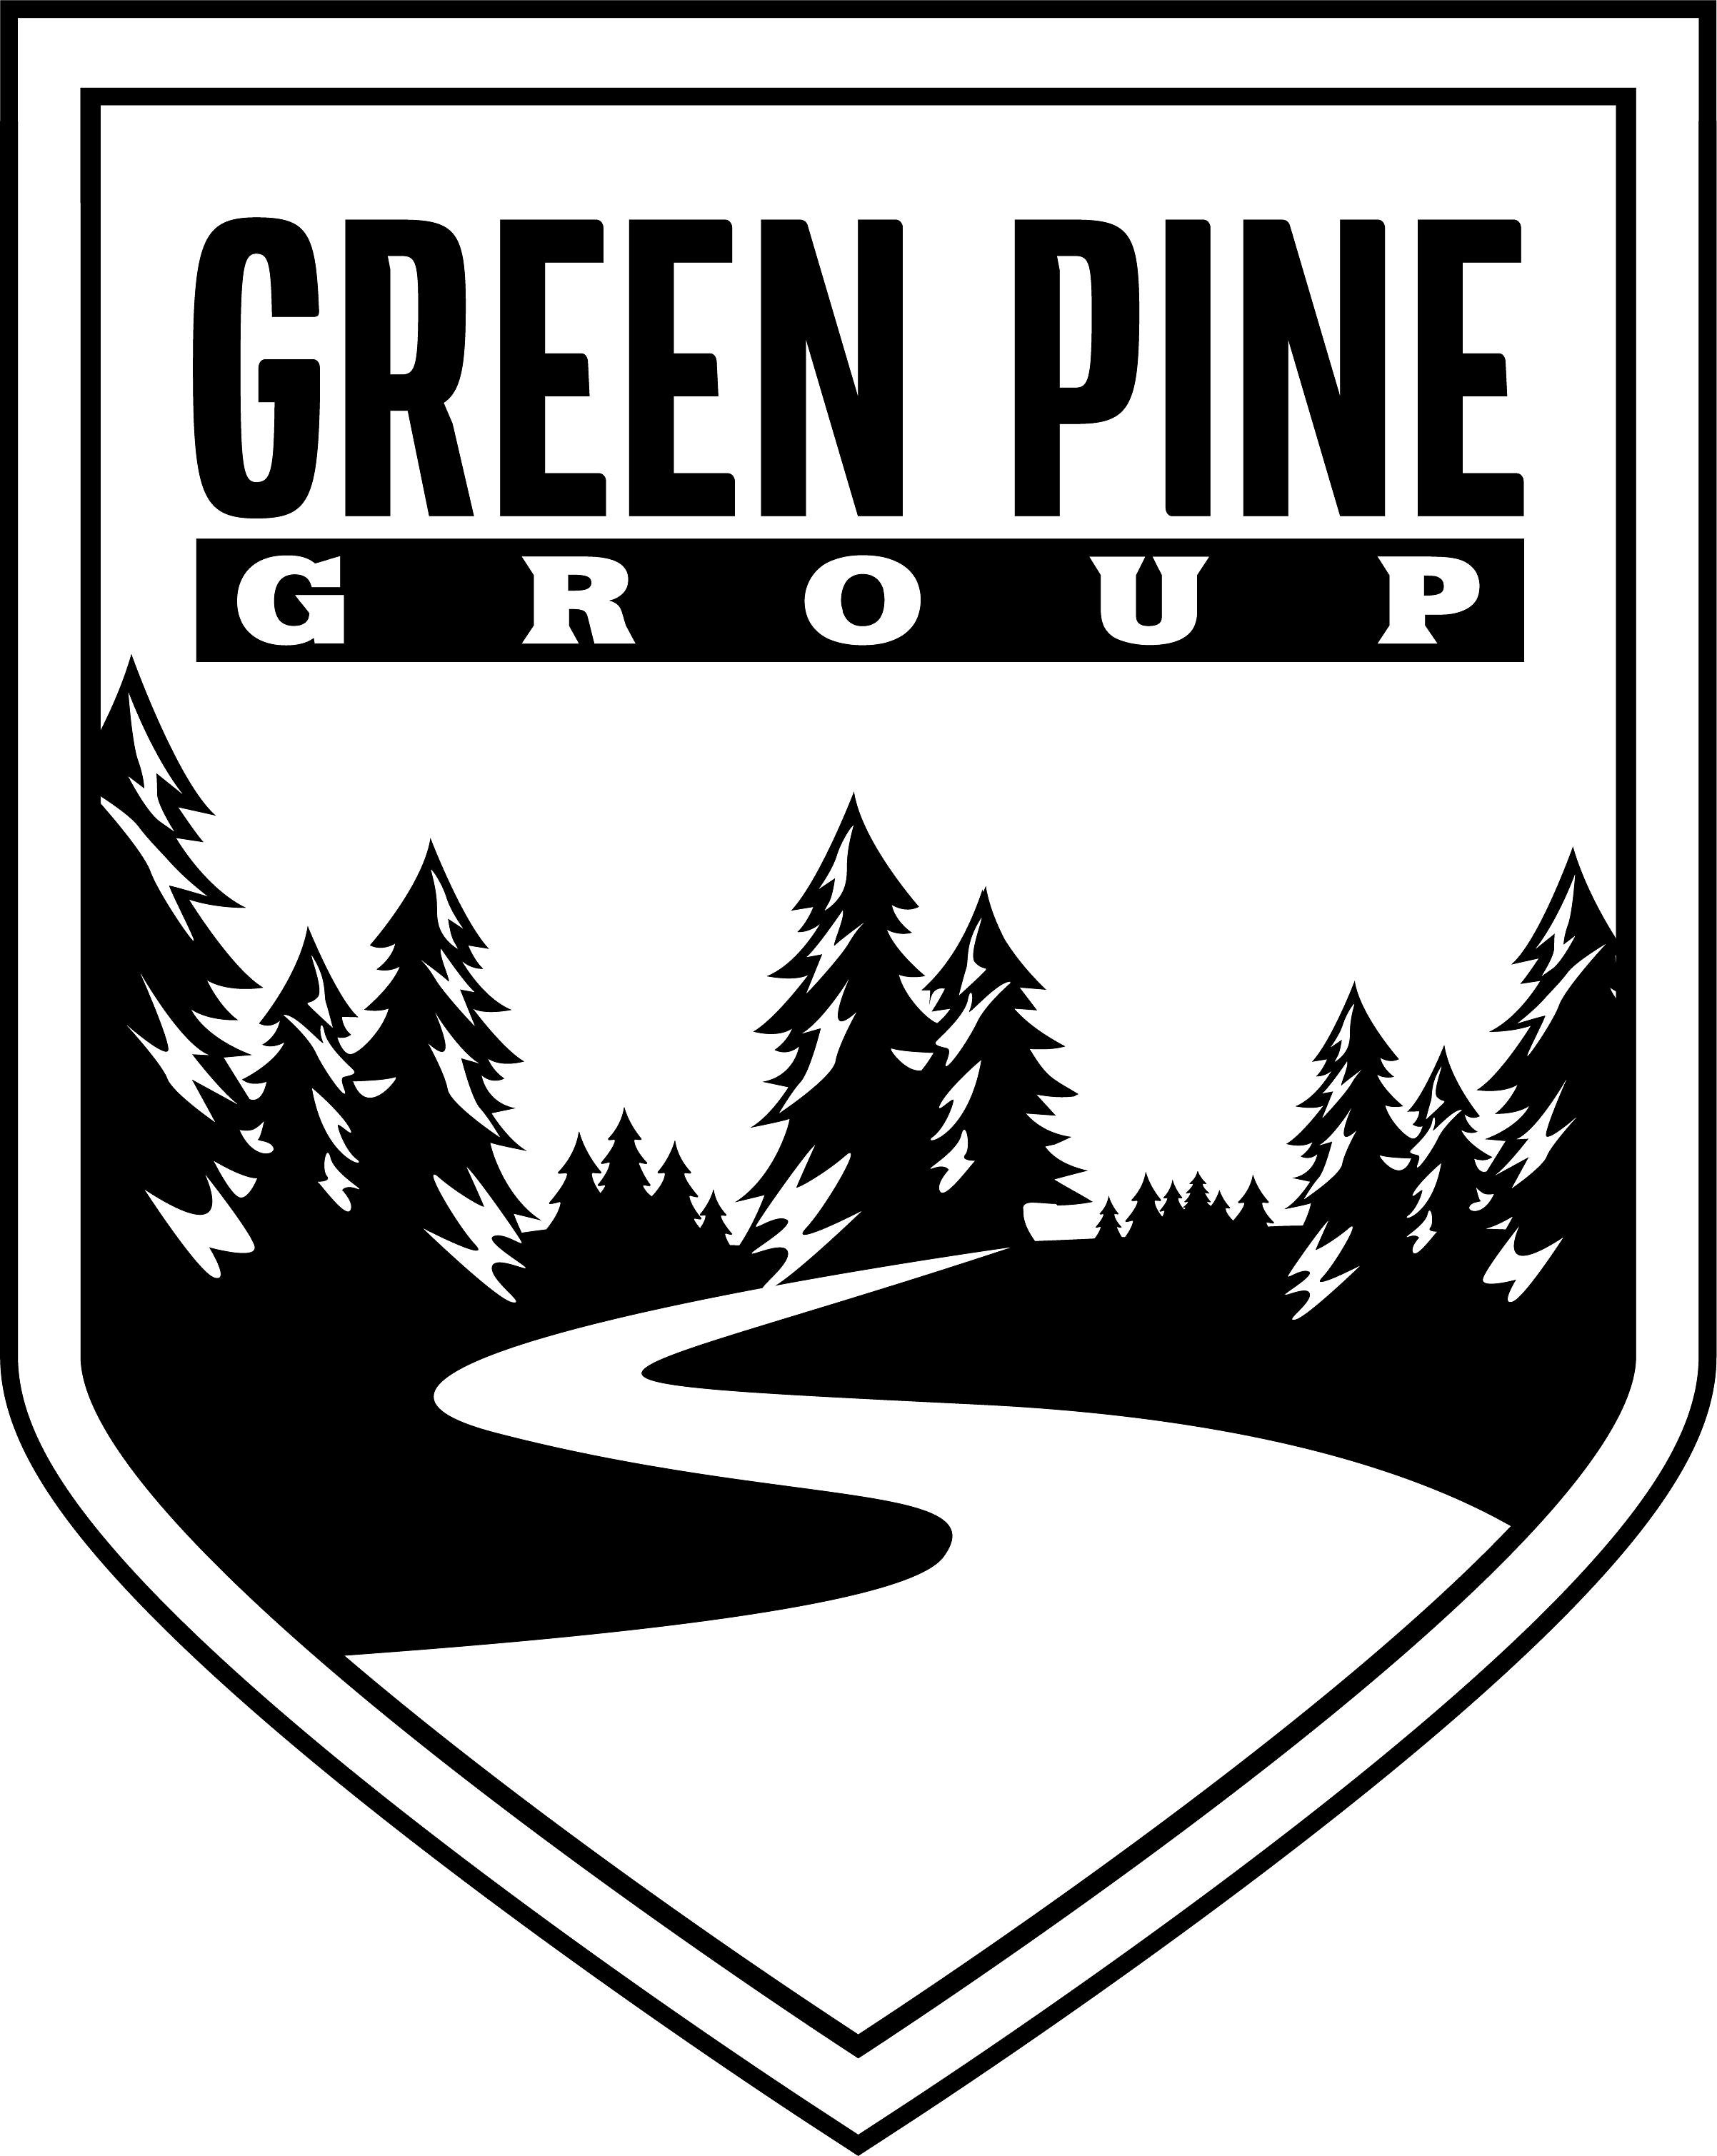 Green Pine Group culture